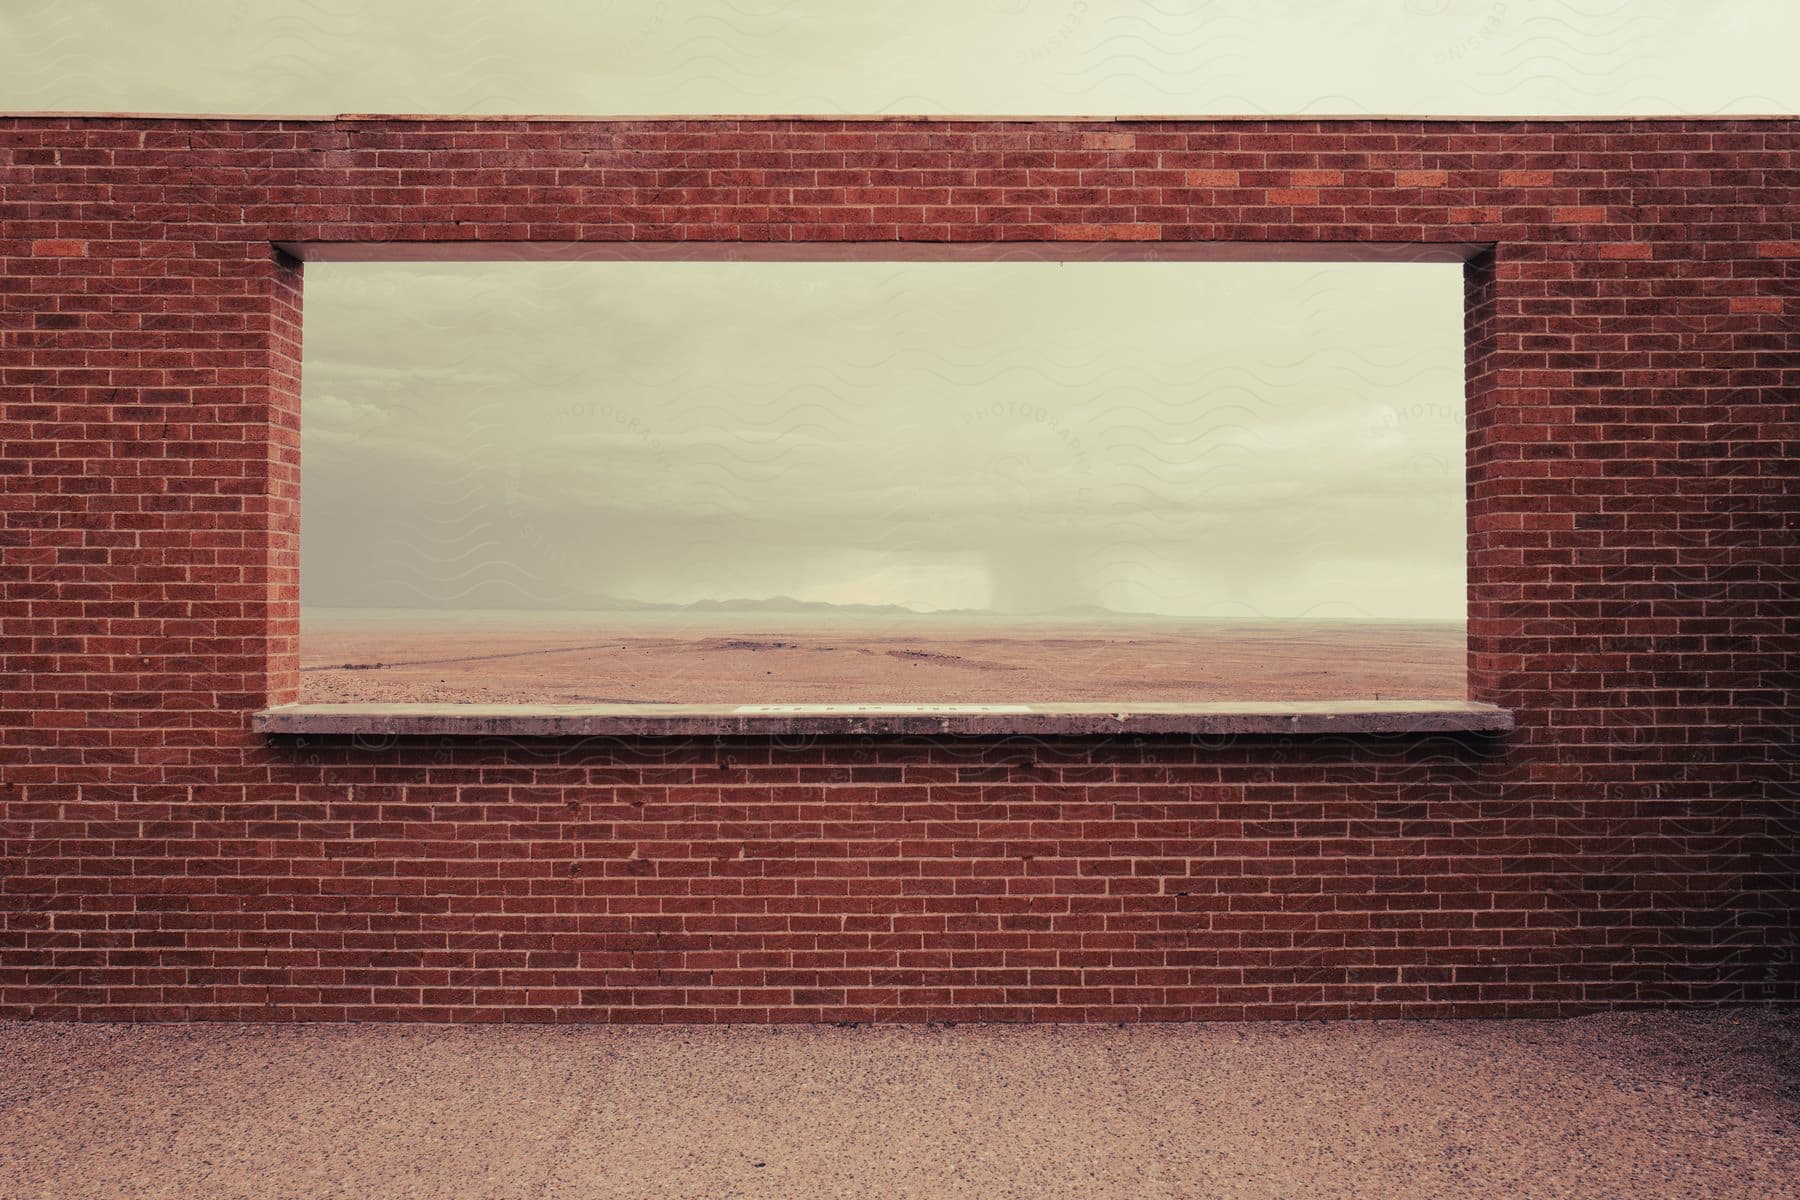 A brick wall with a window framing a desert landscape during a storm